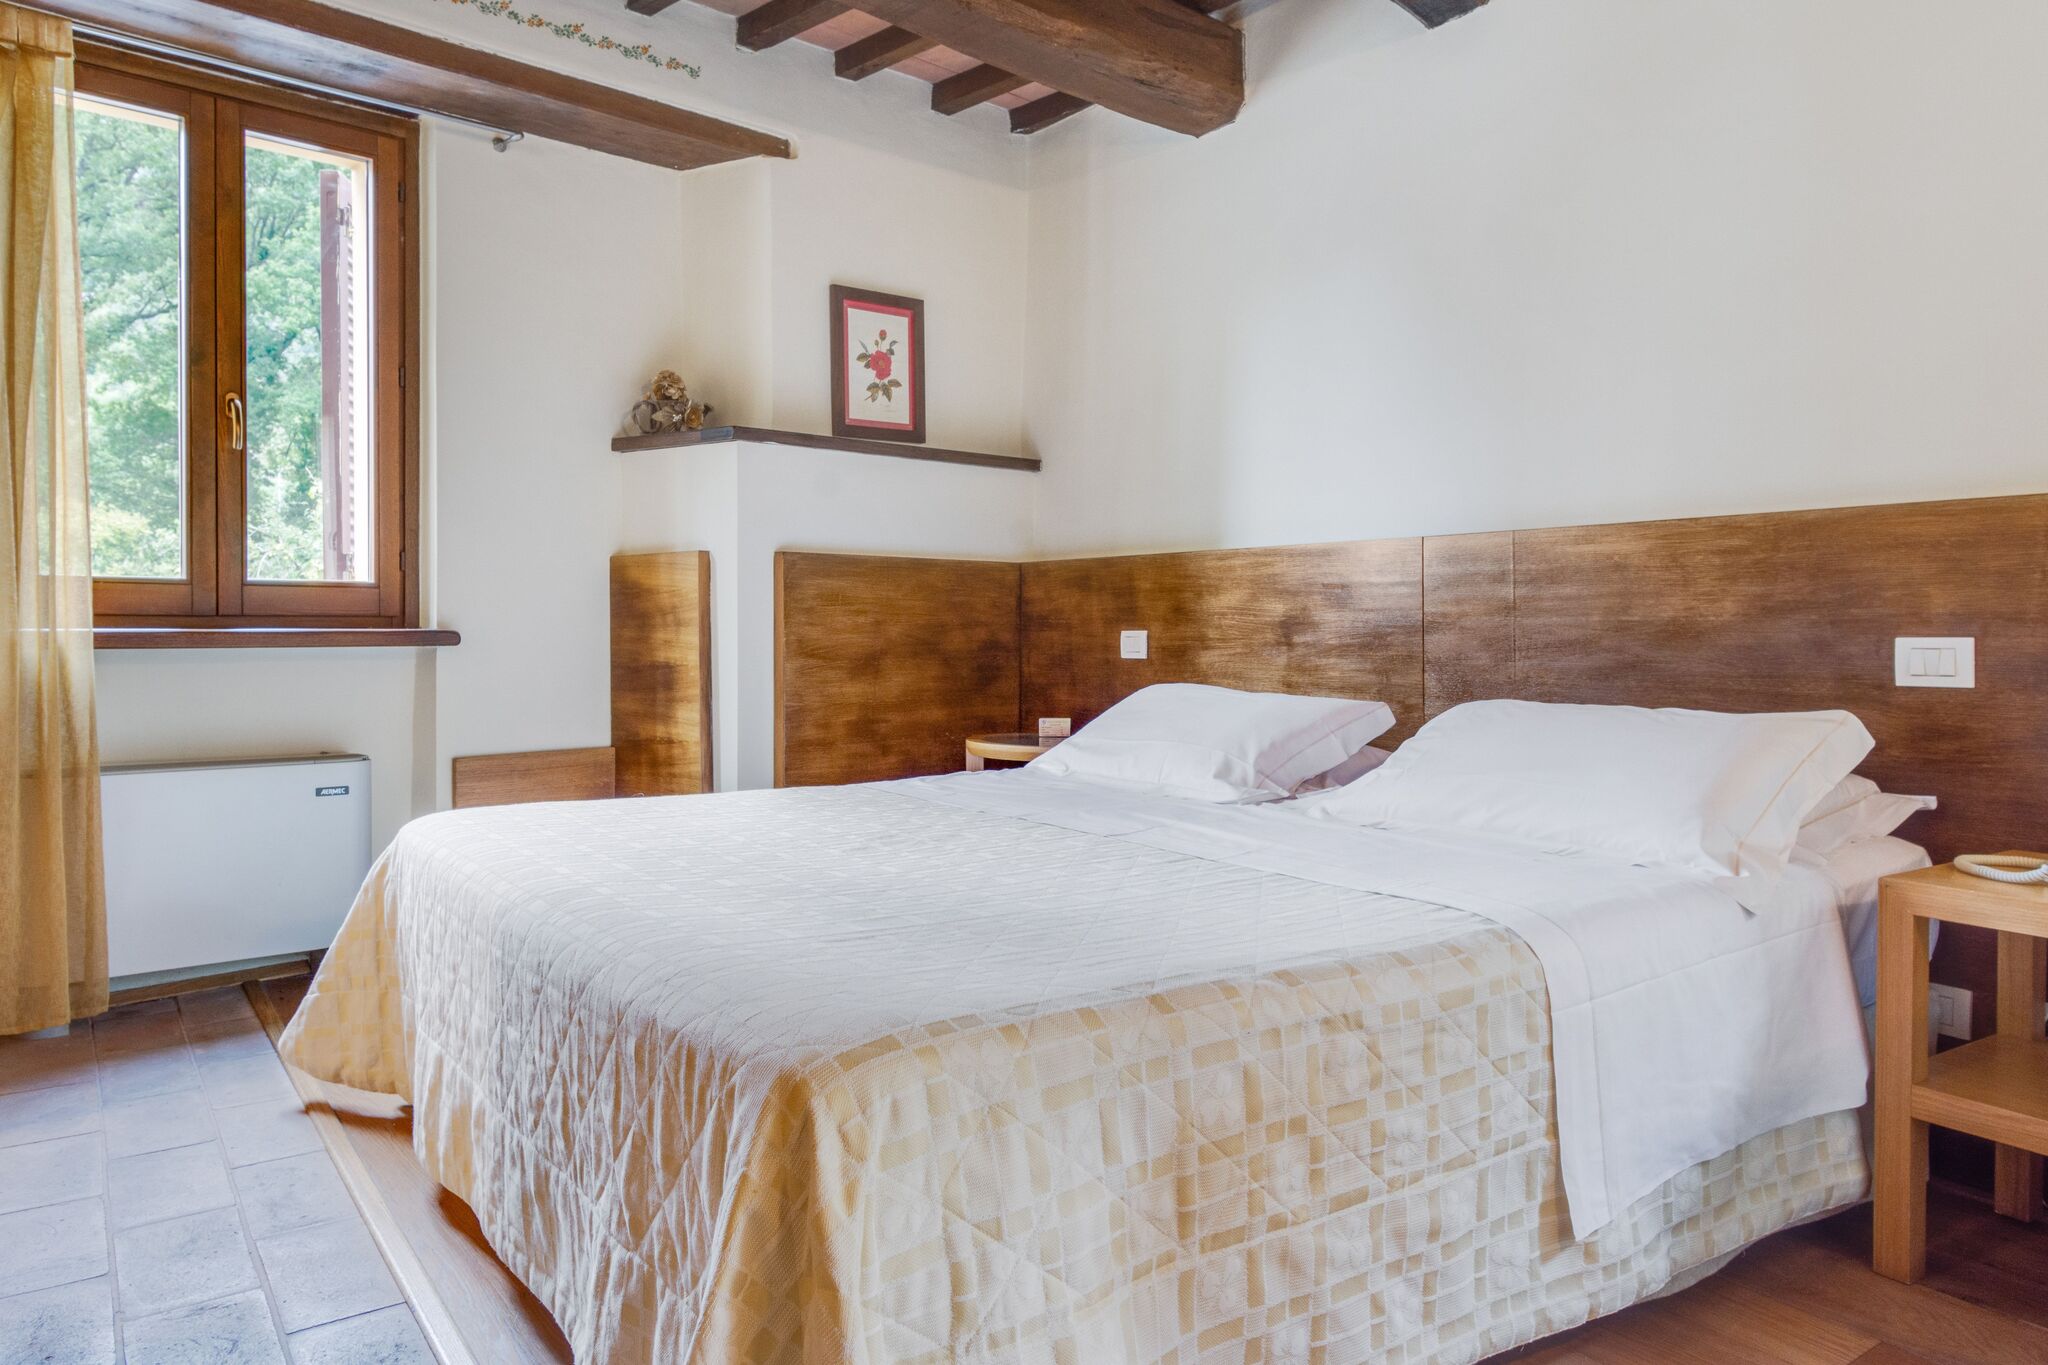 Heavenly Holiday Home in Folignio with Whirlpool